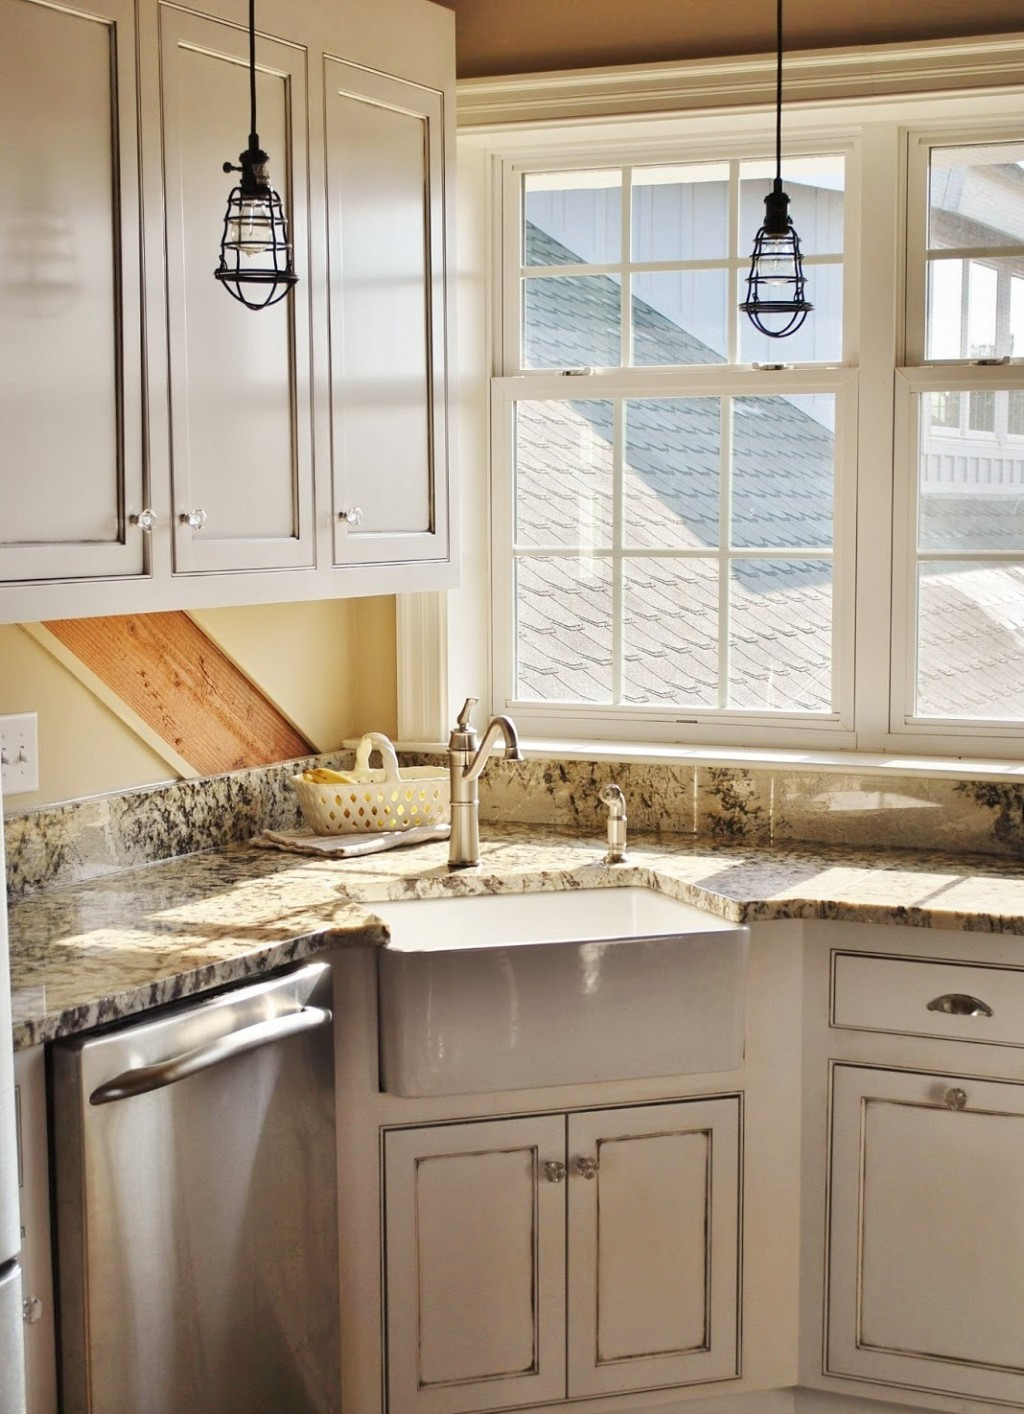 Small Kitchen Sink Cabinet Best Of Advantages And Disadvantages Of Corner Kitchen Sinks Of Small Kitchen Sink Cabinet 